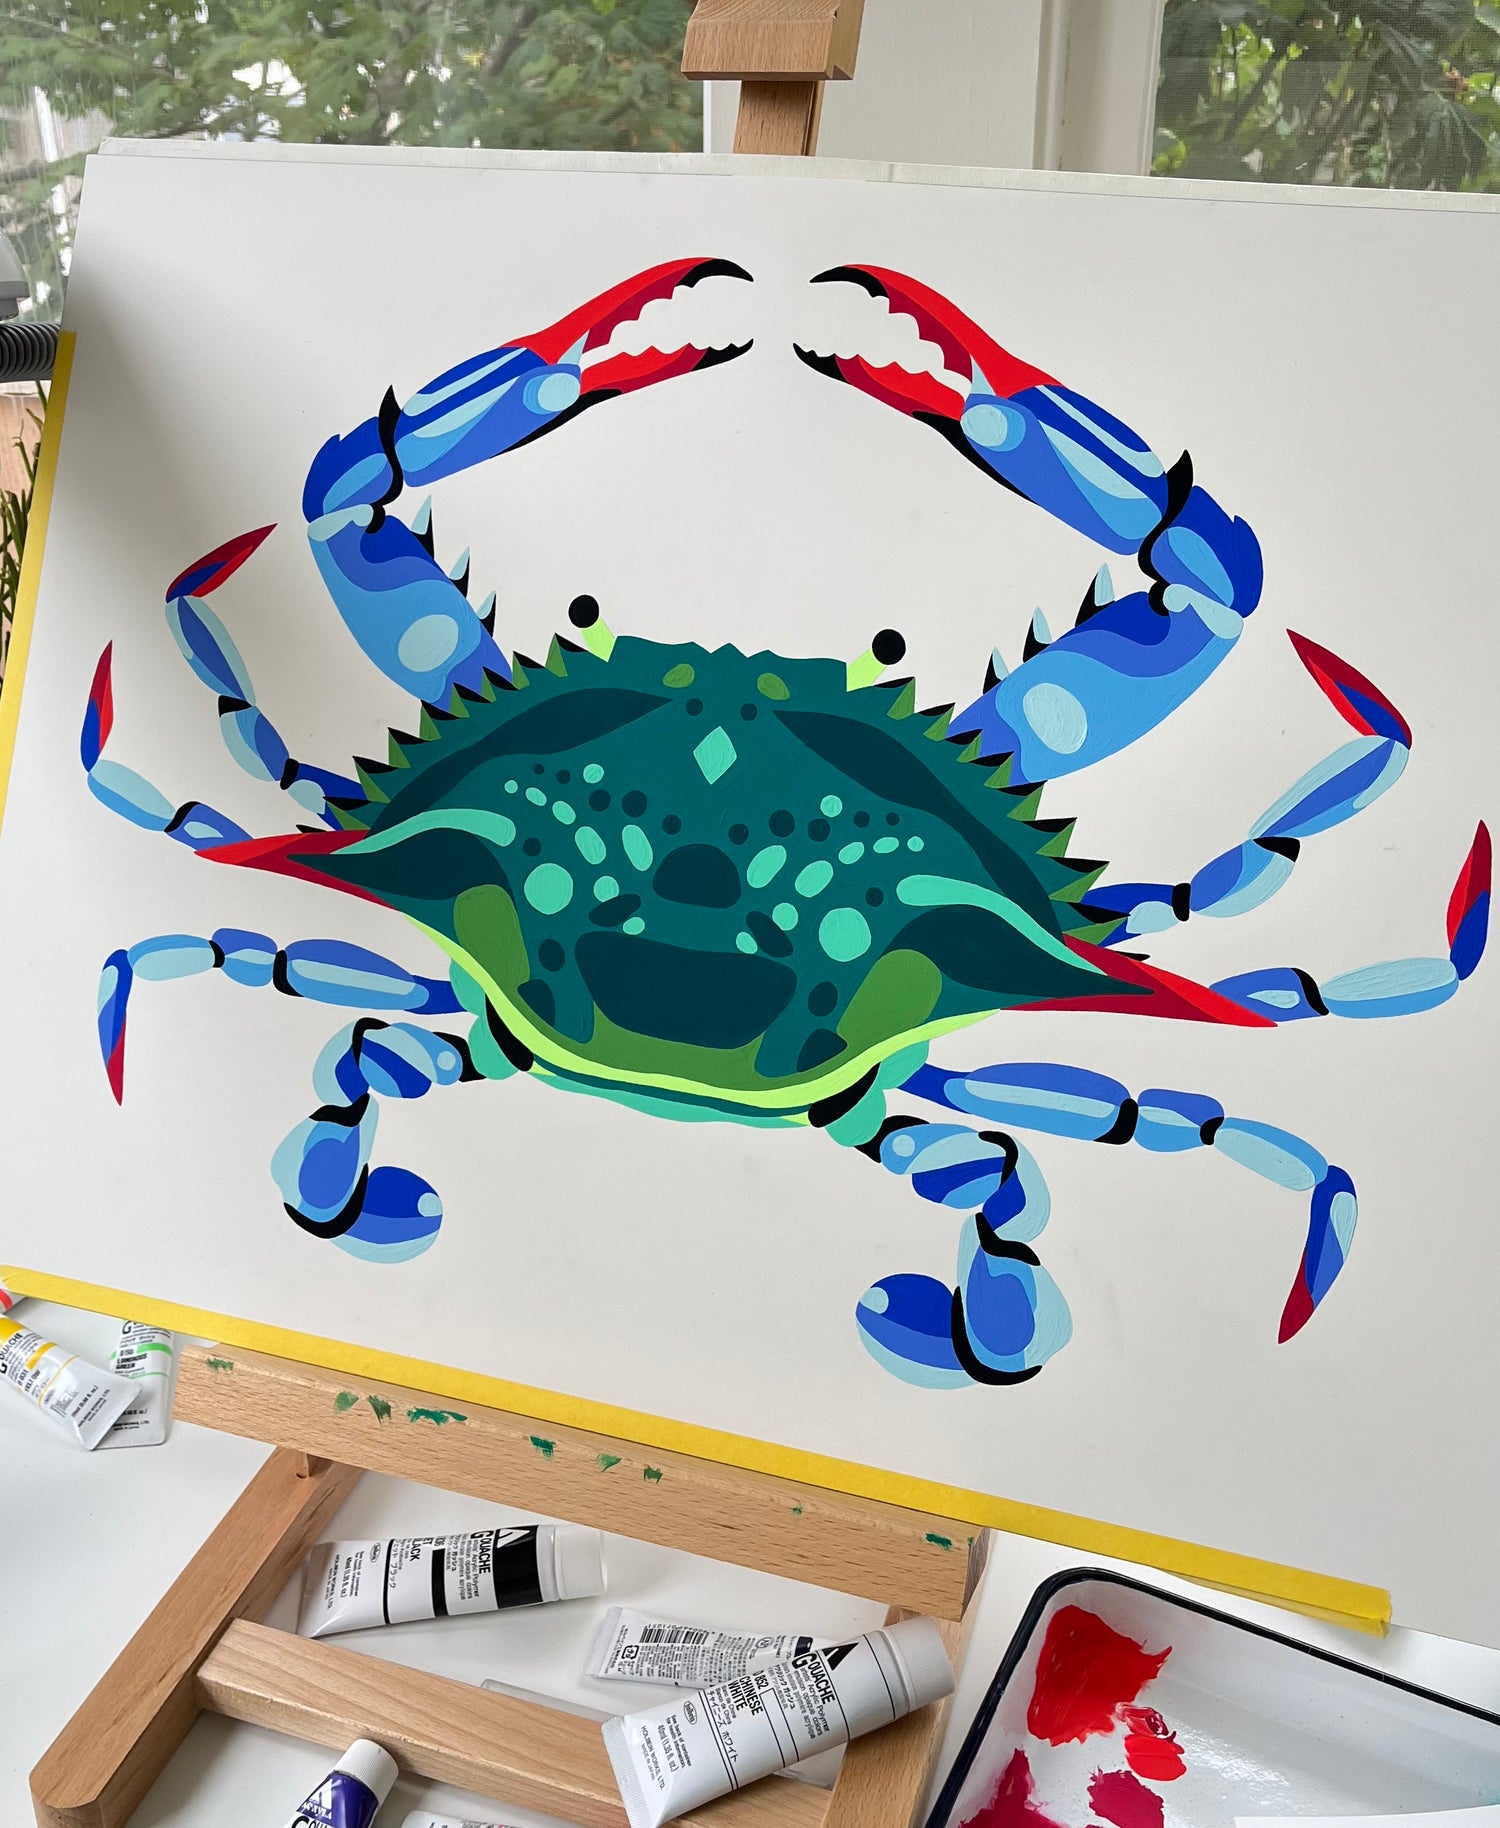 Original painting of an East Coast crab